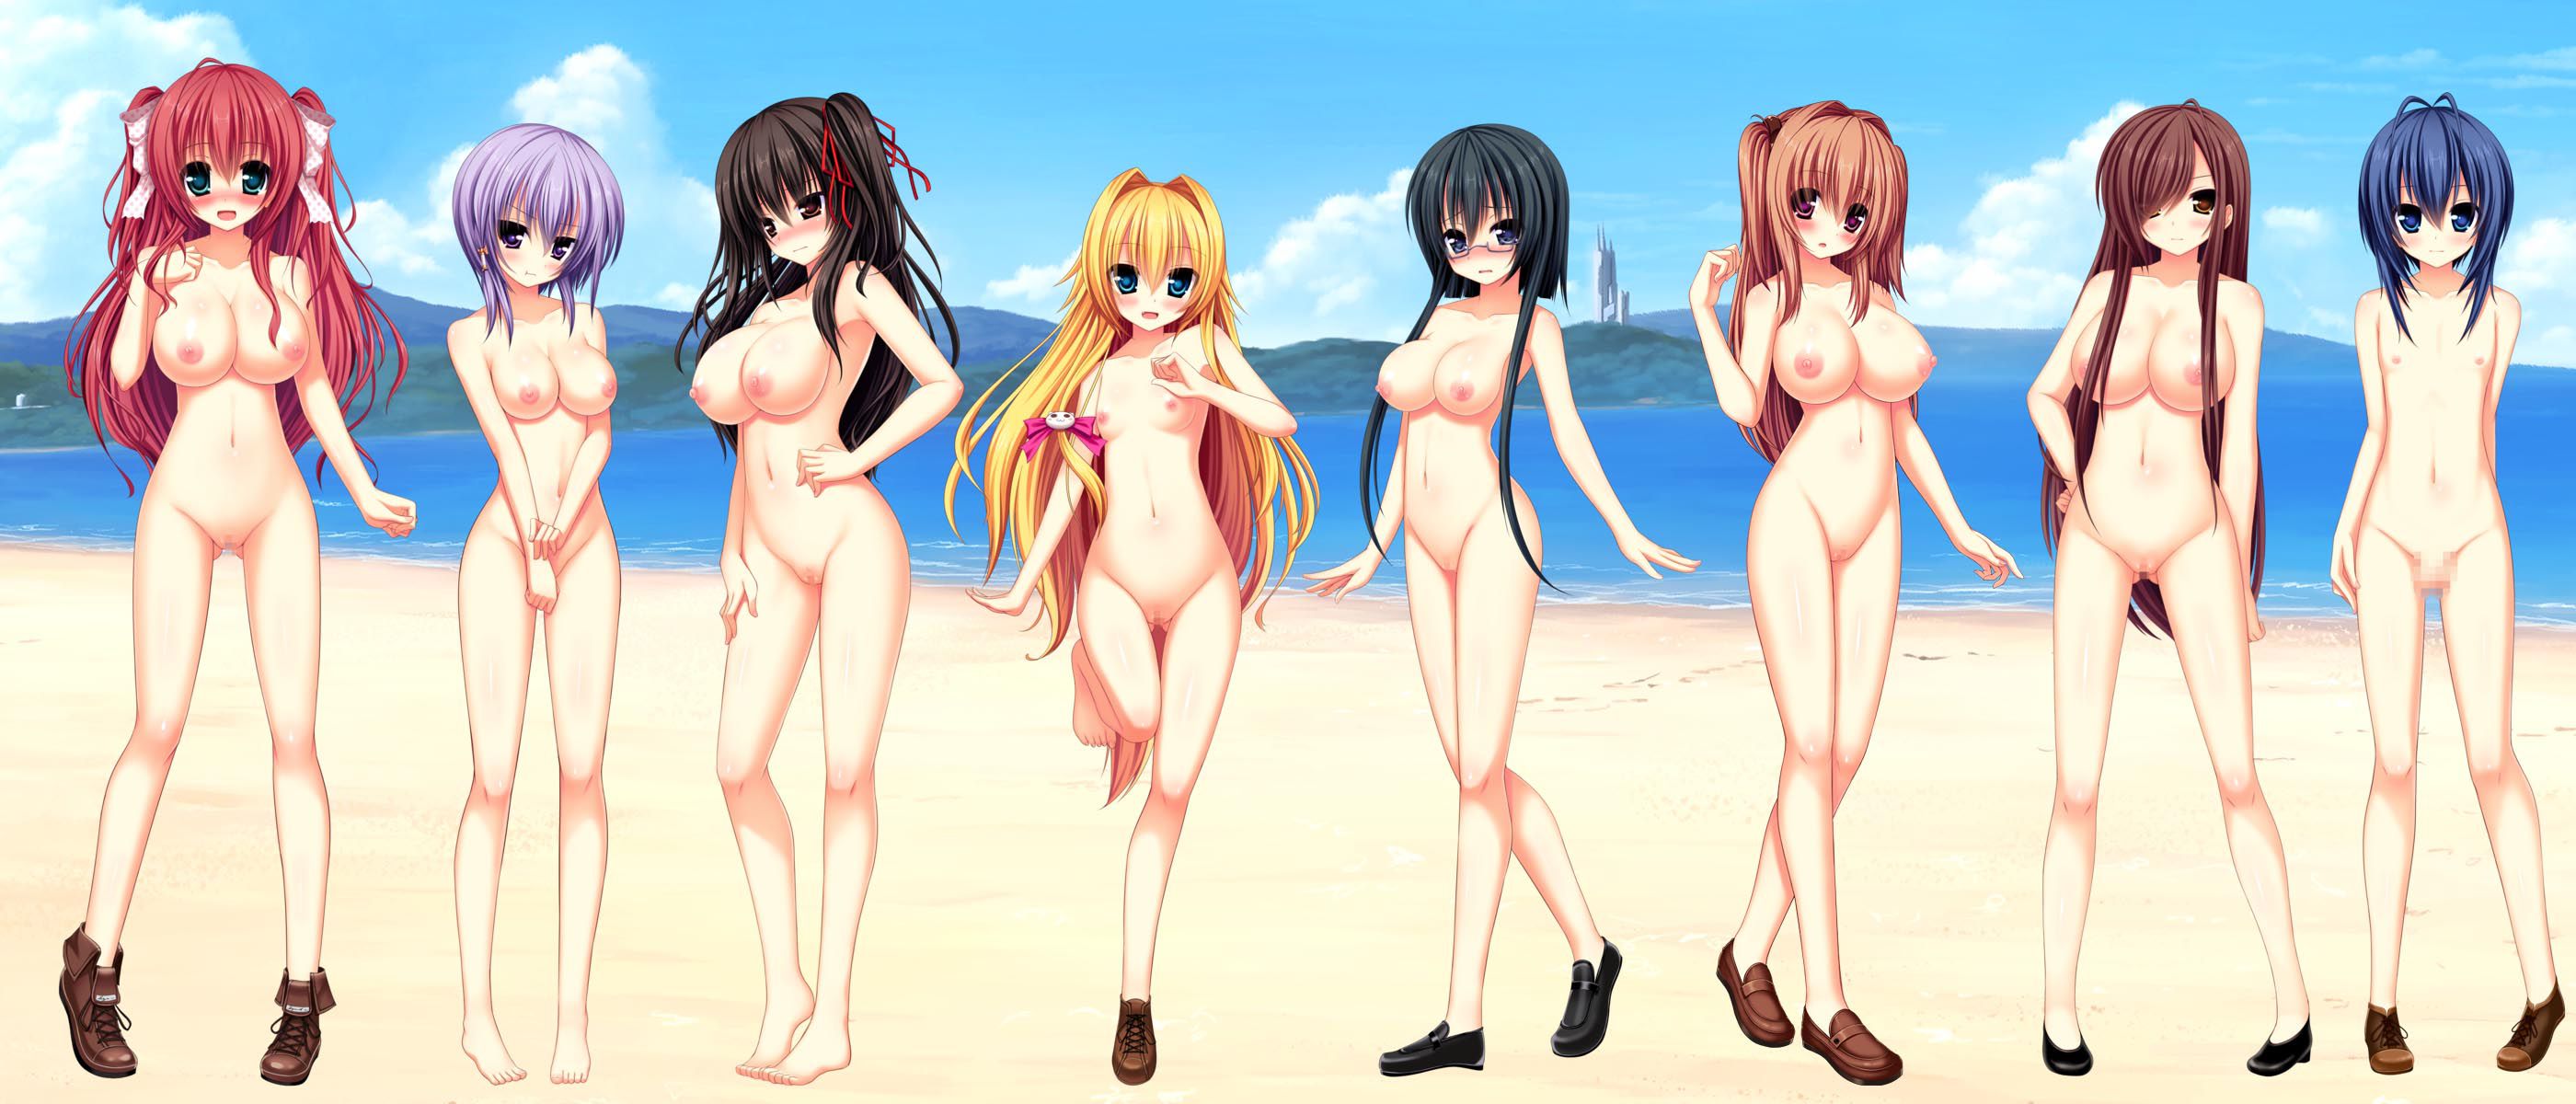 Namickideration [under age 18 prohibited eroge CG] wallpapers, images 16